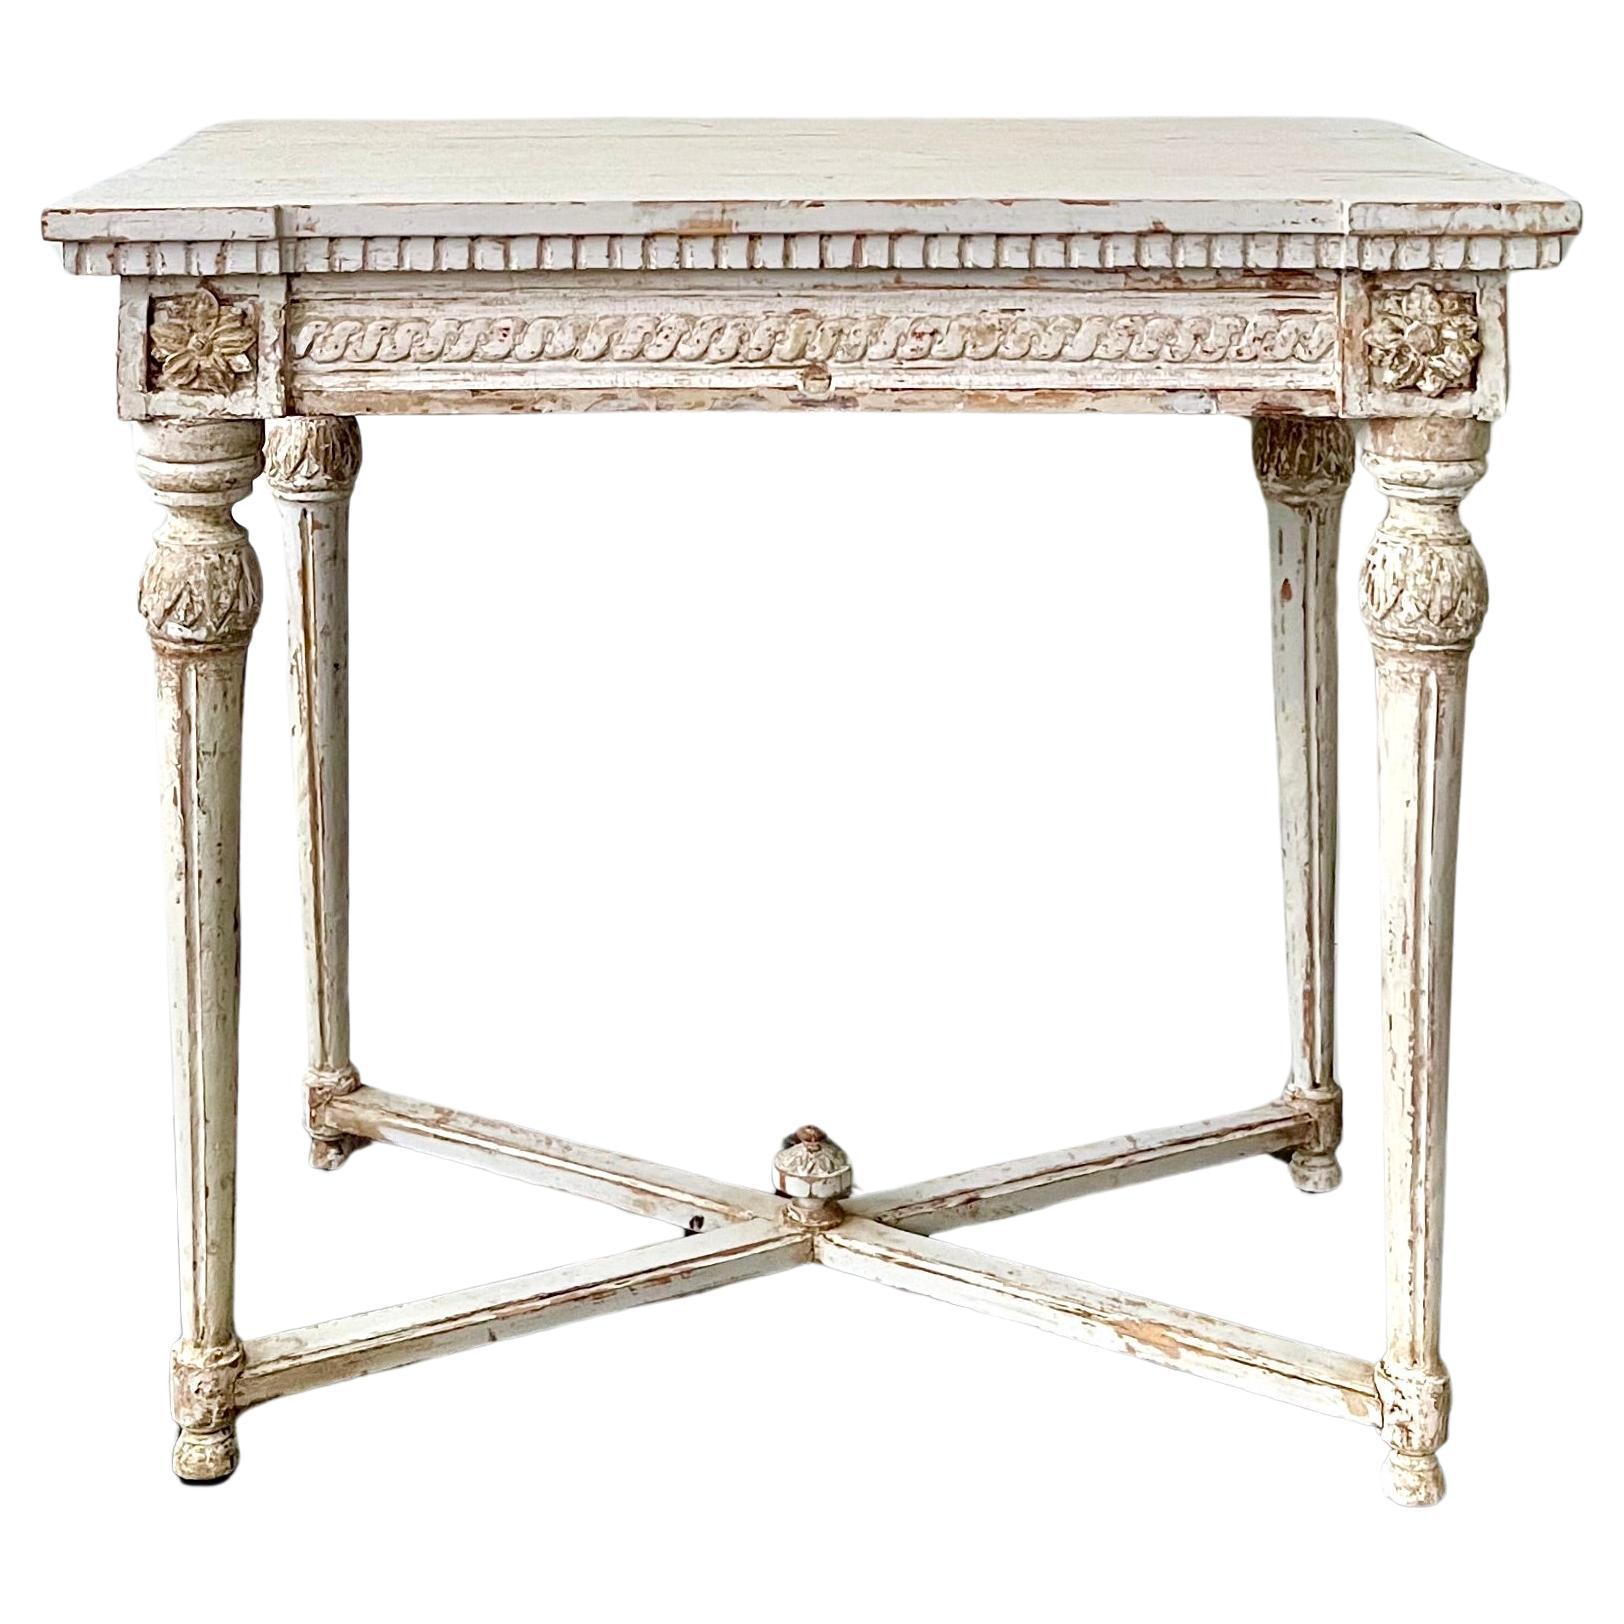 Early 19th Century Swedish Gustavian Neoclassical Painted Console Table For Sale